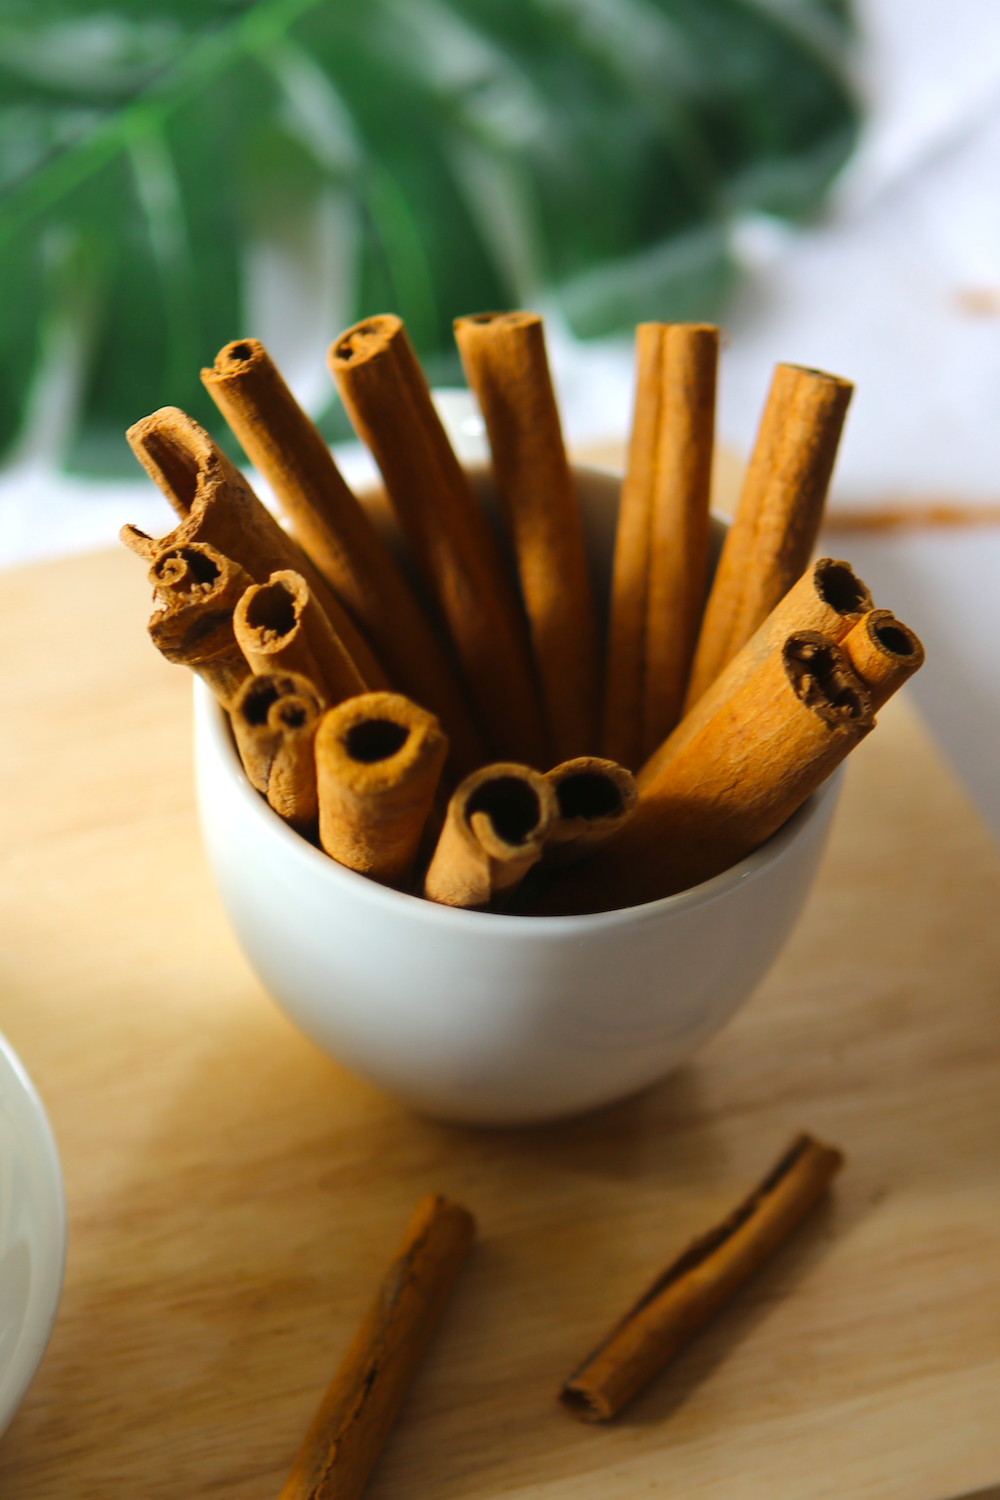 cinnamon sticks in a white cup on a wooden platter with a few scattered cinnamon sticks next to the cup